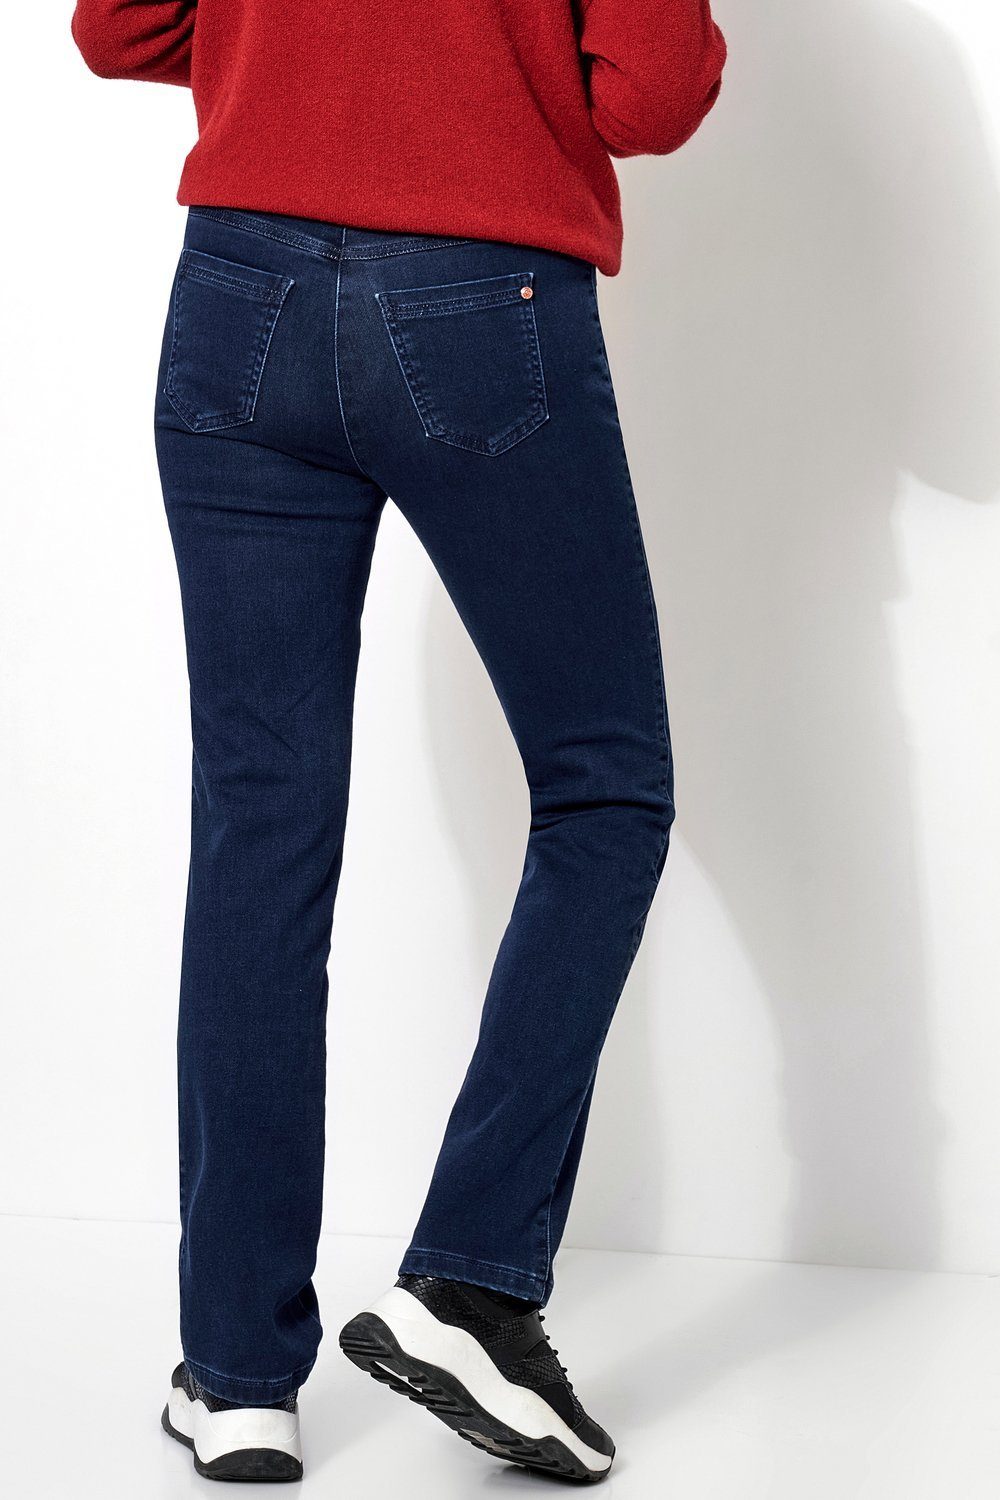 Relaxed Toni TONI Relaxed 058 5-Pocket-Hose by